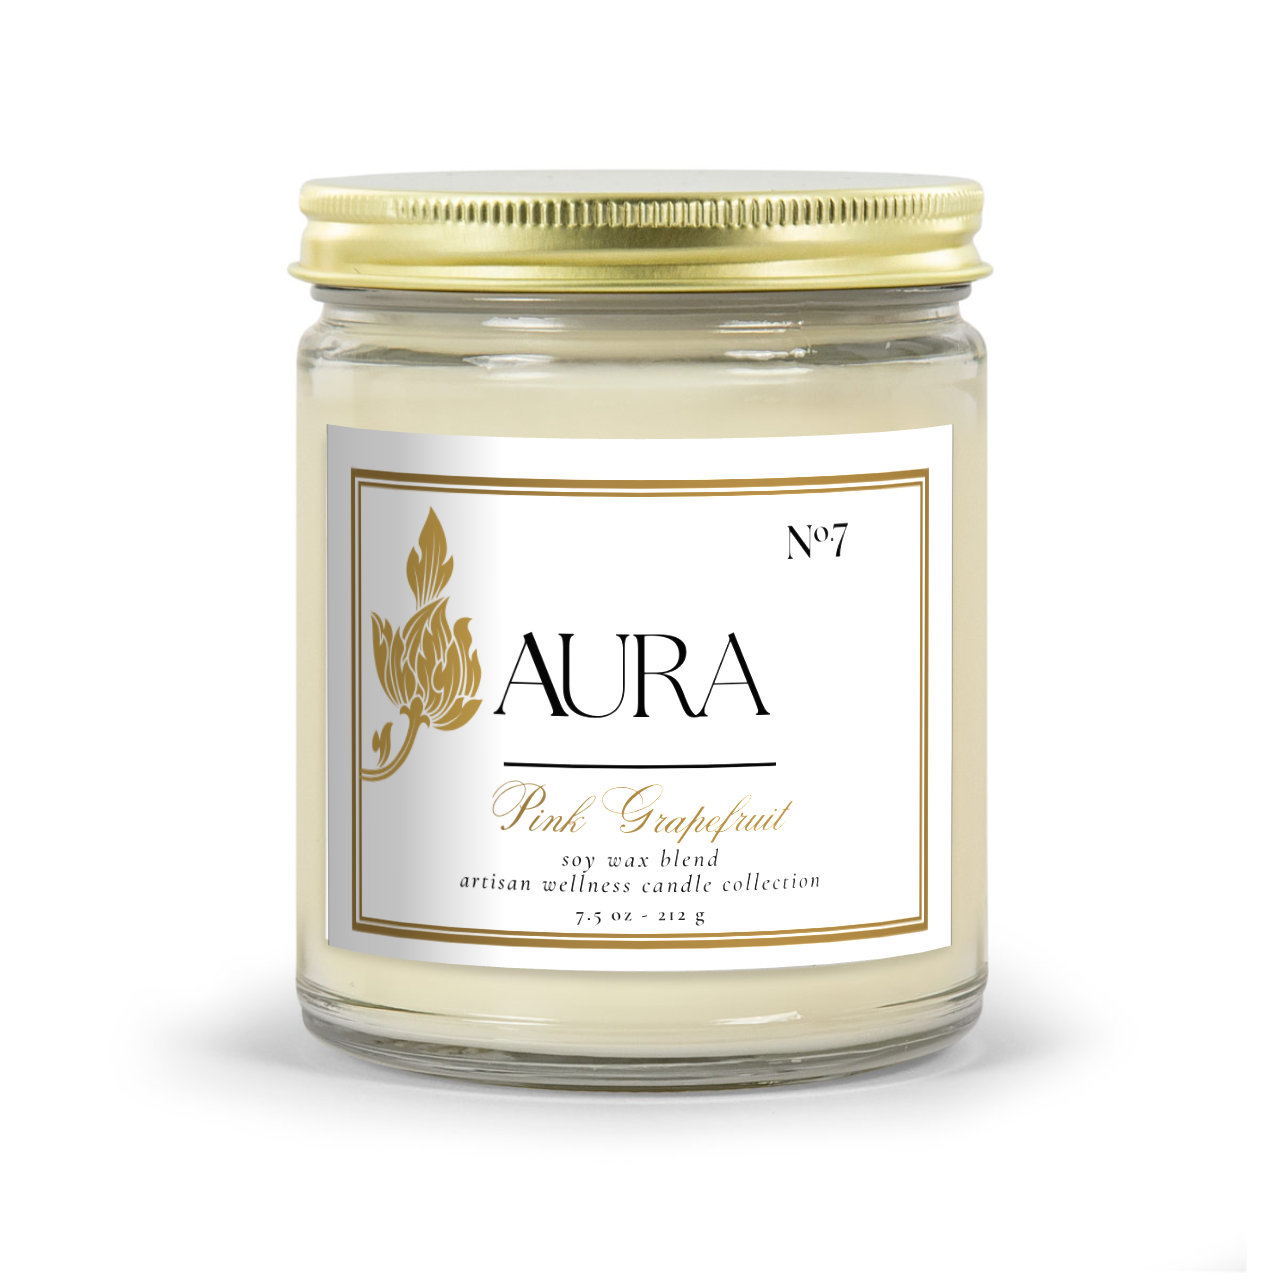 Aromatherapy Candle - Aura Aromas Artisan Wellness Candle Collection:  Classic Amber Or Classic Clear Vessel Pink Grapefruit Scent